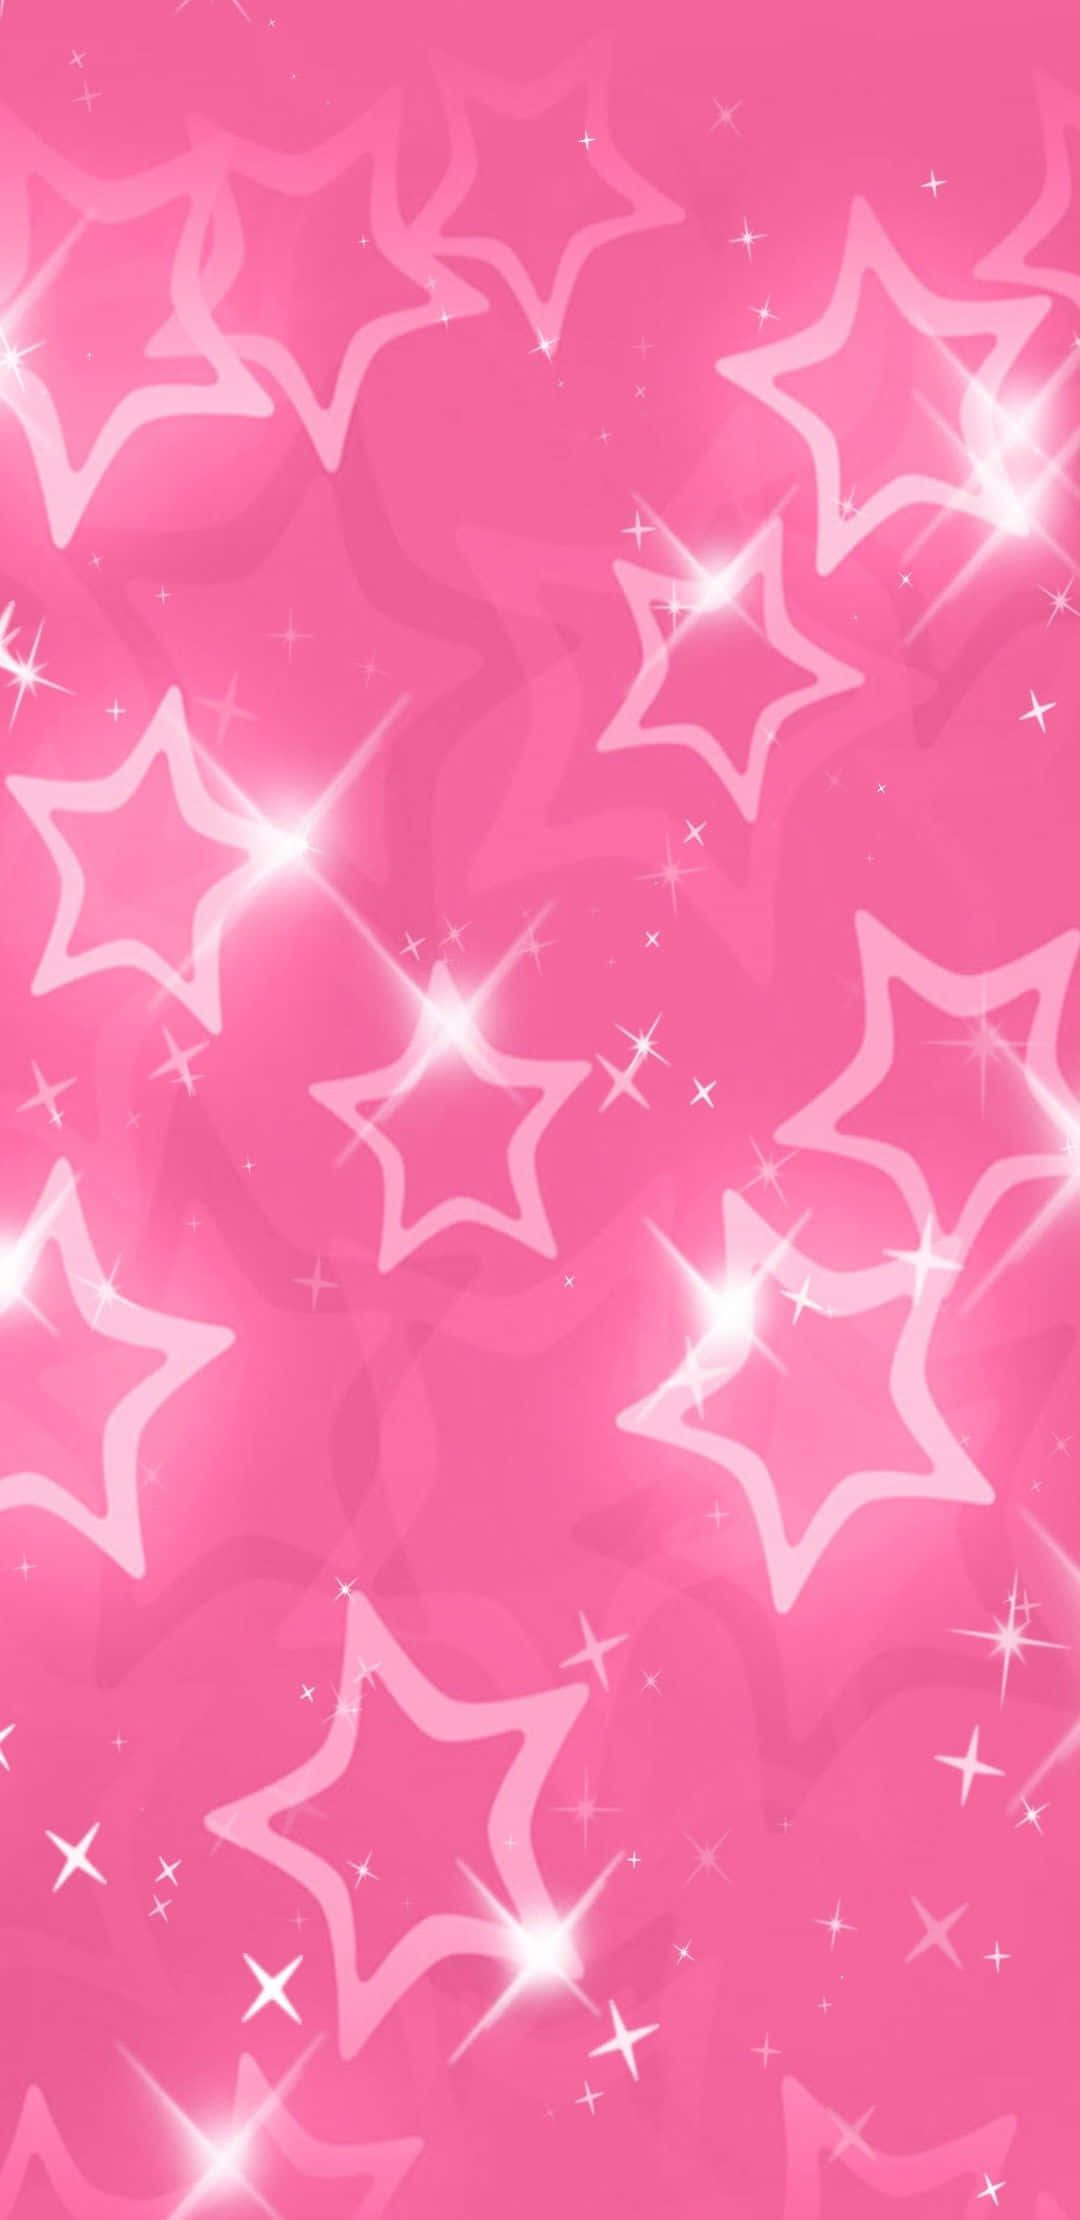 The Beauty of an Aesthetic Star Wallpaper